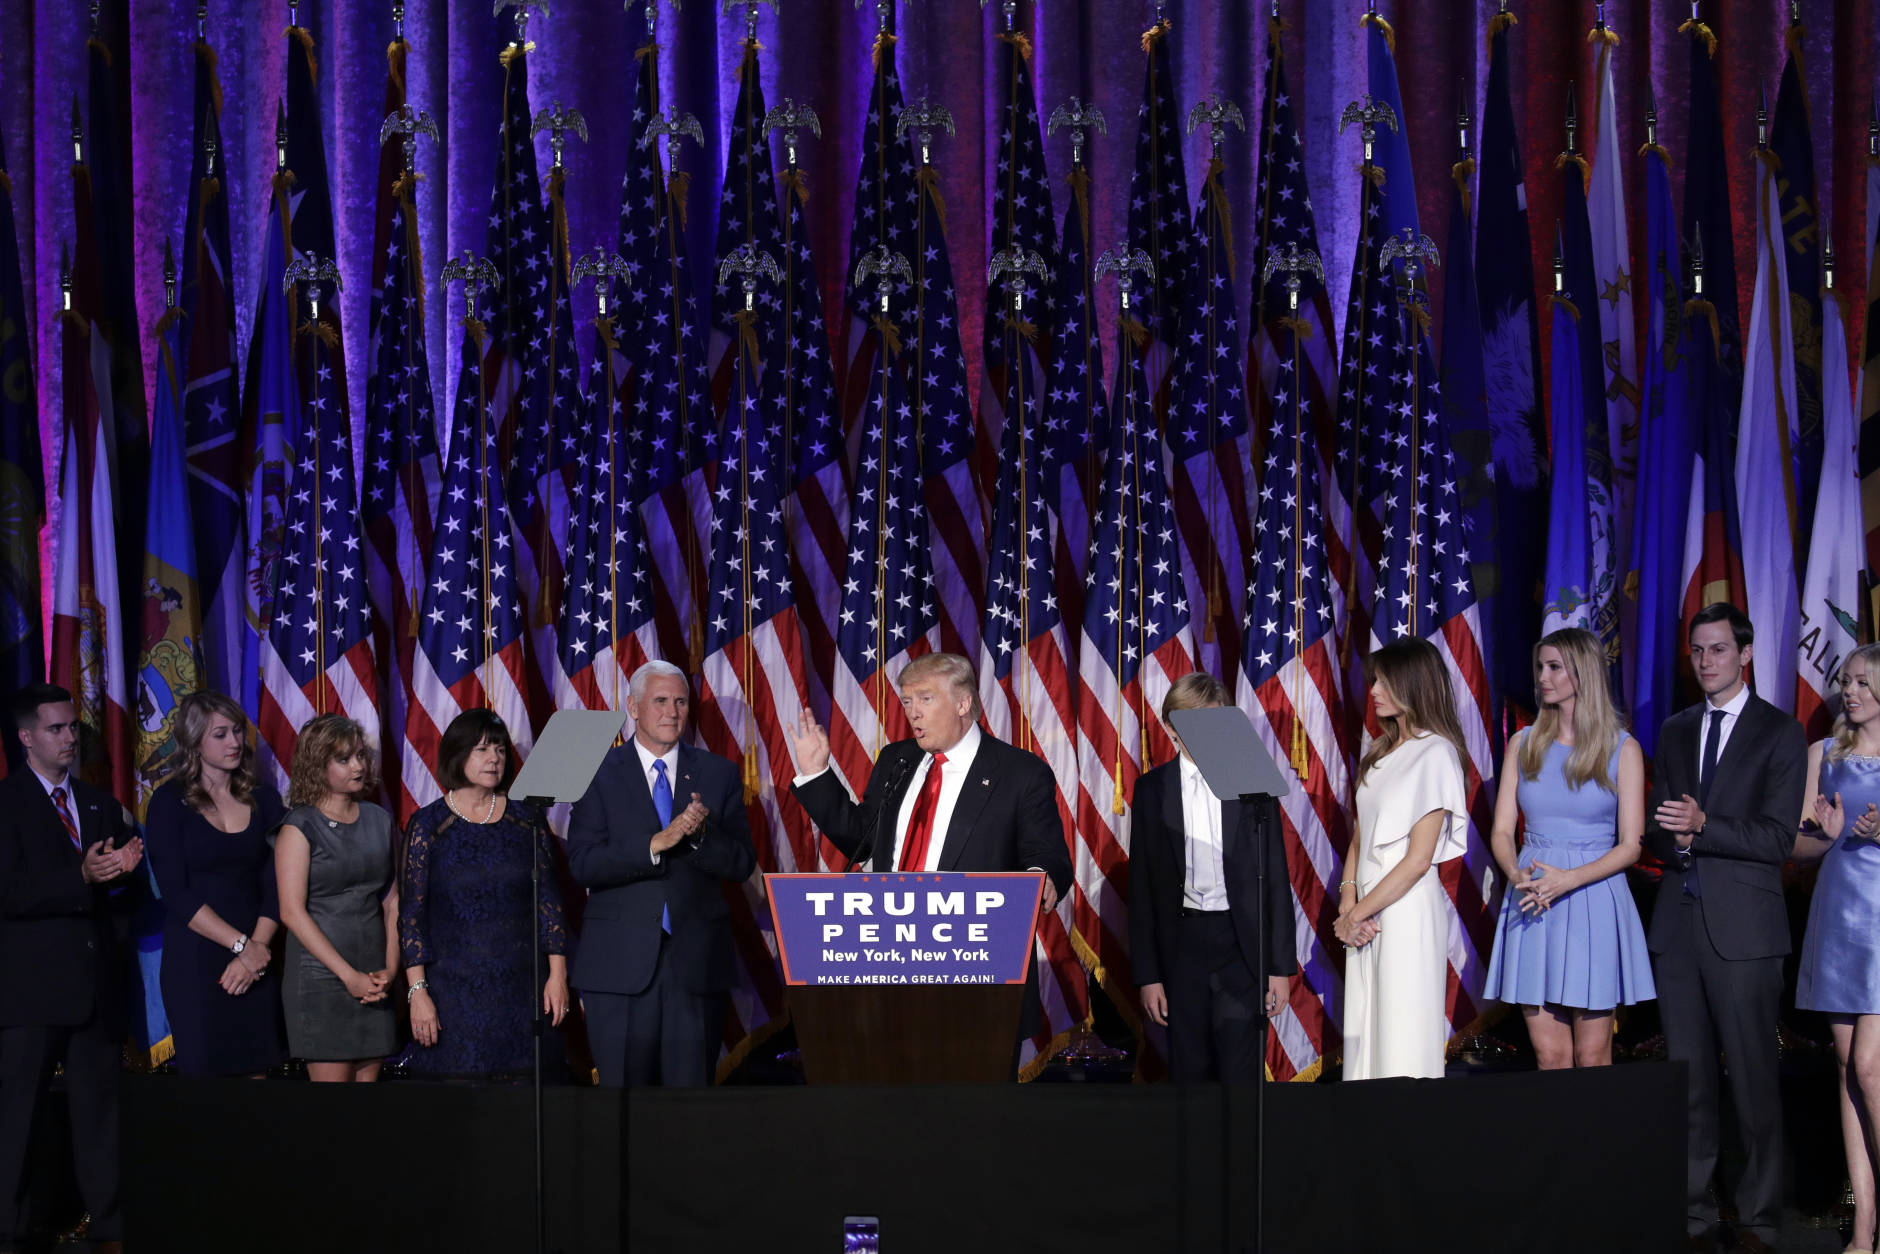 President-elect Donald Trump gives his acceptance speech during his election night rally, Wednesday, Nov. 9, 2016, in New York. (AP Photo/John Locher)